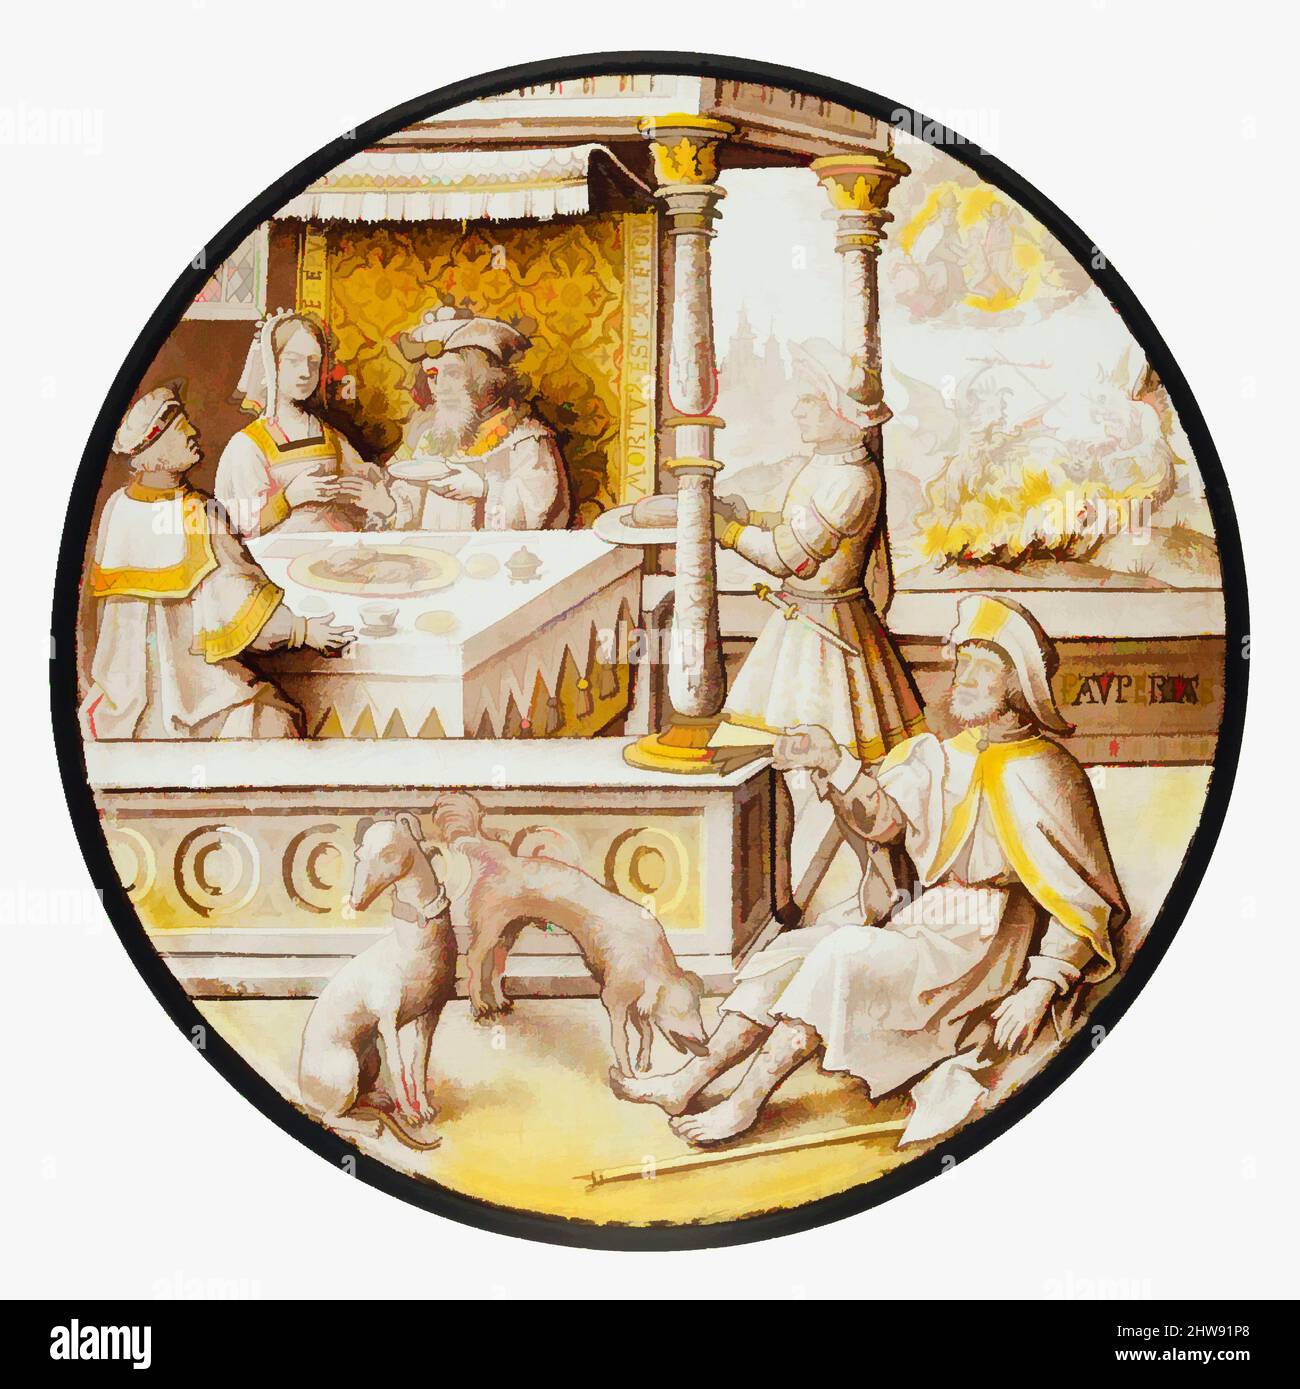 Art inspired by Roundel with Lazarus at the House of Dives, ca. 1520, South Netherlandish, Colorless glass, vitreous paint and silver stain, Overall Diam.: 8 11/16 in. (22.1 cm), Glass-Stained, Classic works modernized by Artotop with a splash of modernity. Shapes, color and value, eye-catching visual impact on art. Emotions through freedom of artworks in a contemporary way. A timeless message pursuing a wildly creative new direction. Artists turning to the digital medium and creating the Artotop NFT Stock Photo